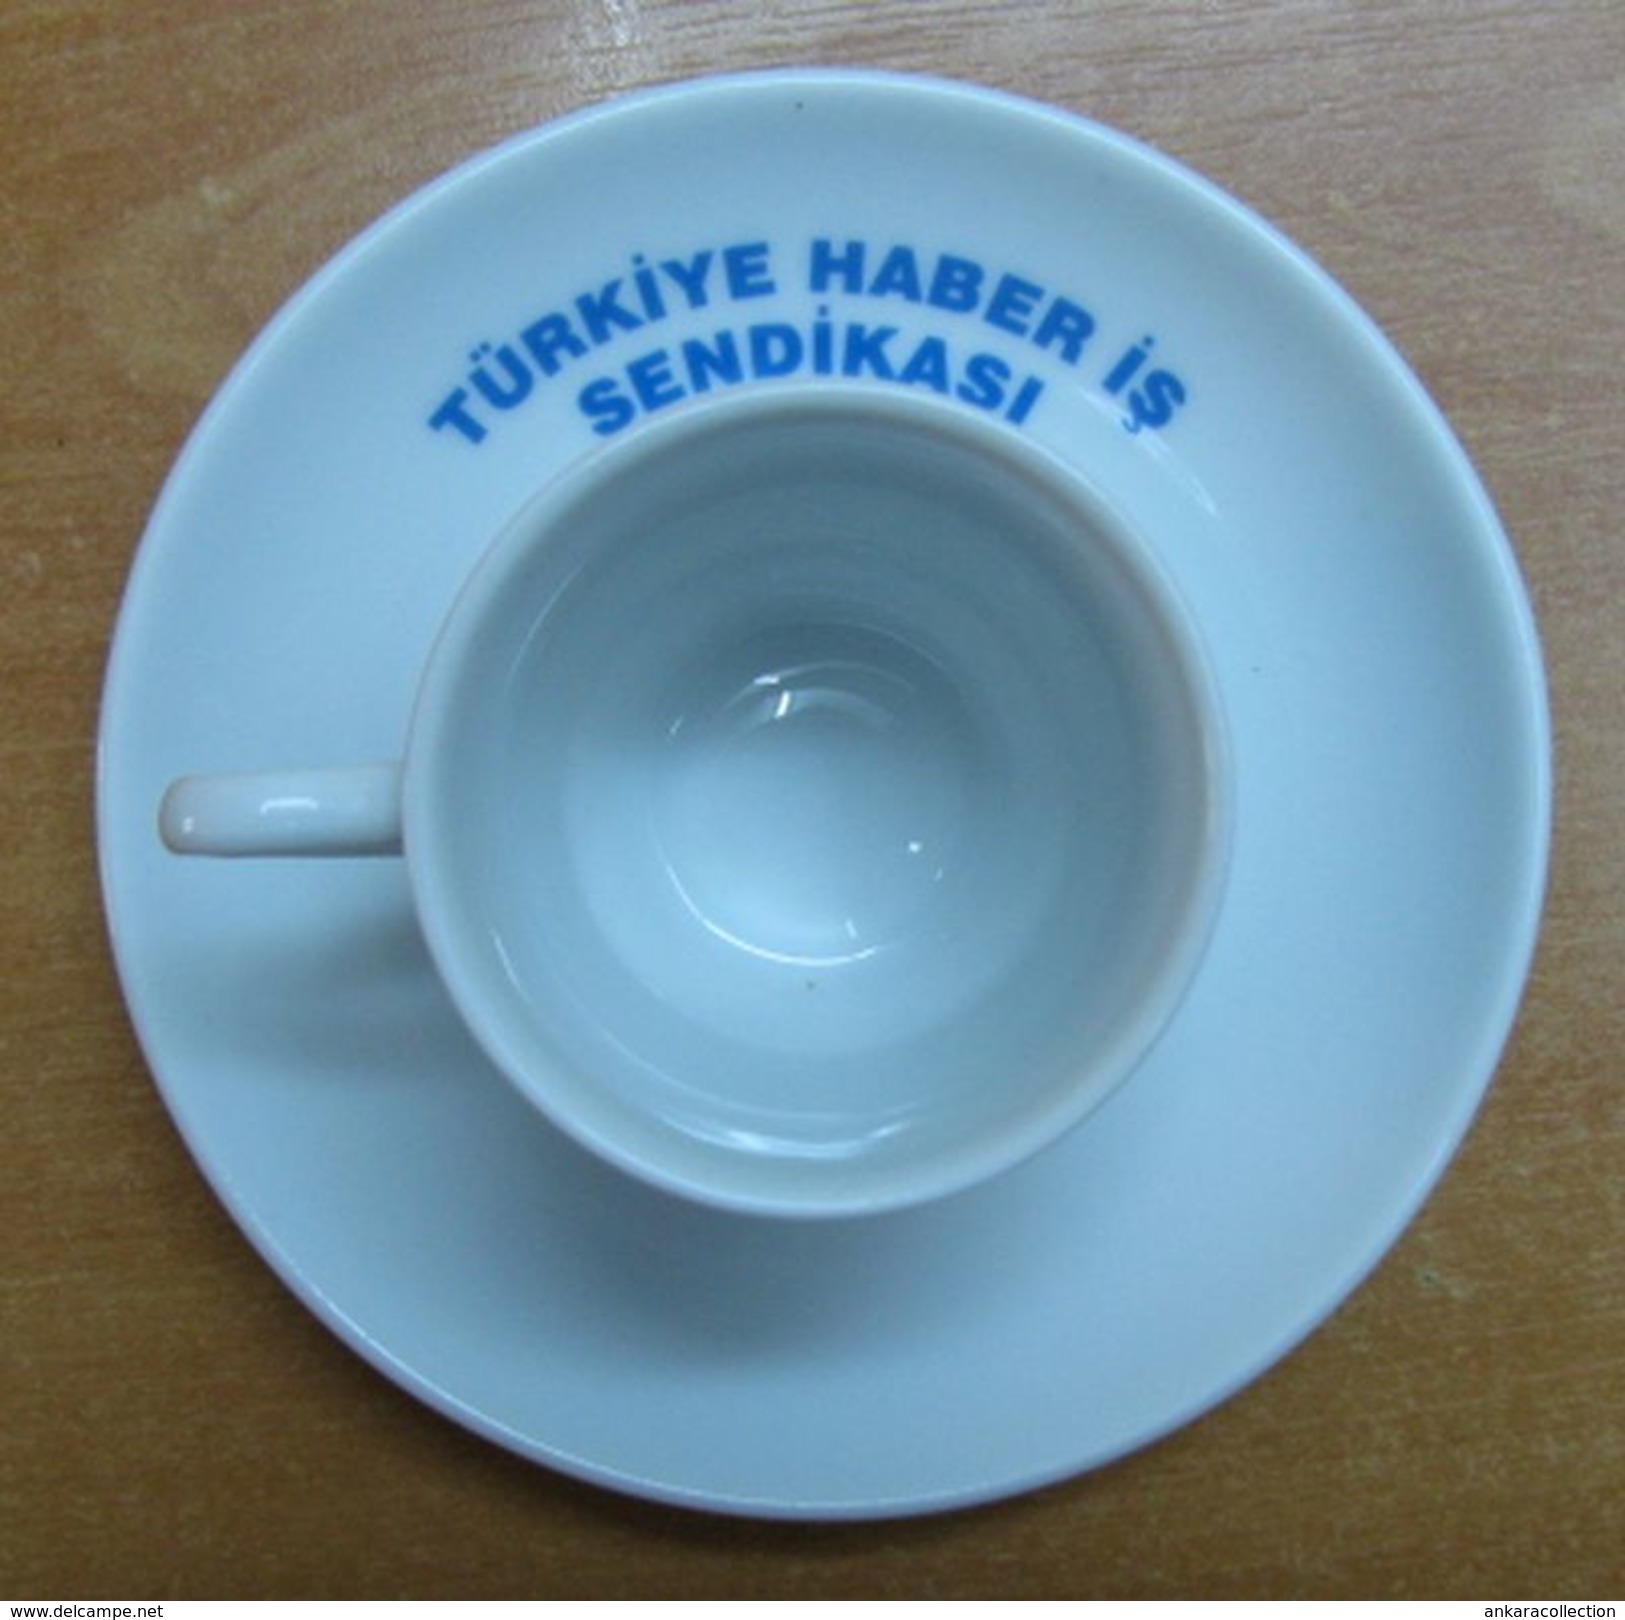 AC - TURKEY HABER IS TRADE UNION PORCELAIN COFFEE CUP - MUG & SAUCER FROM TURKEY - Tazze